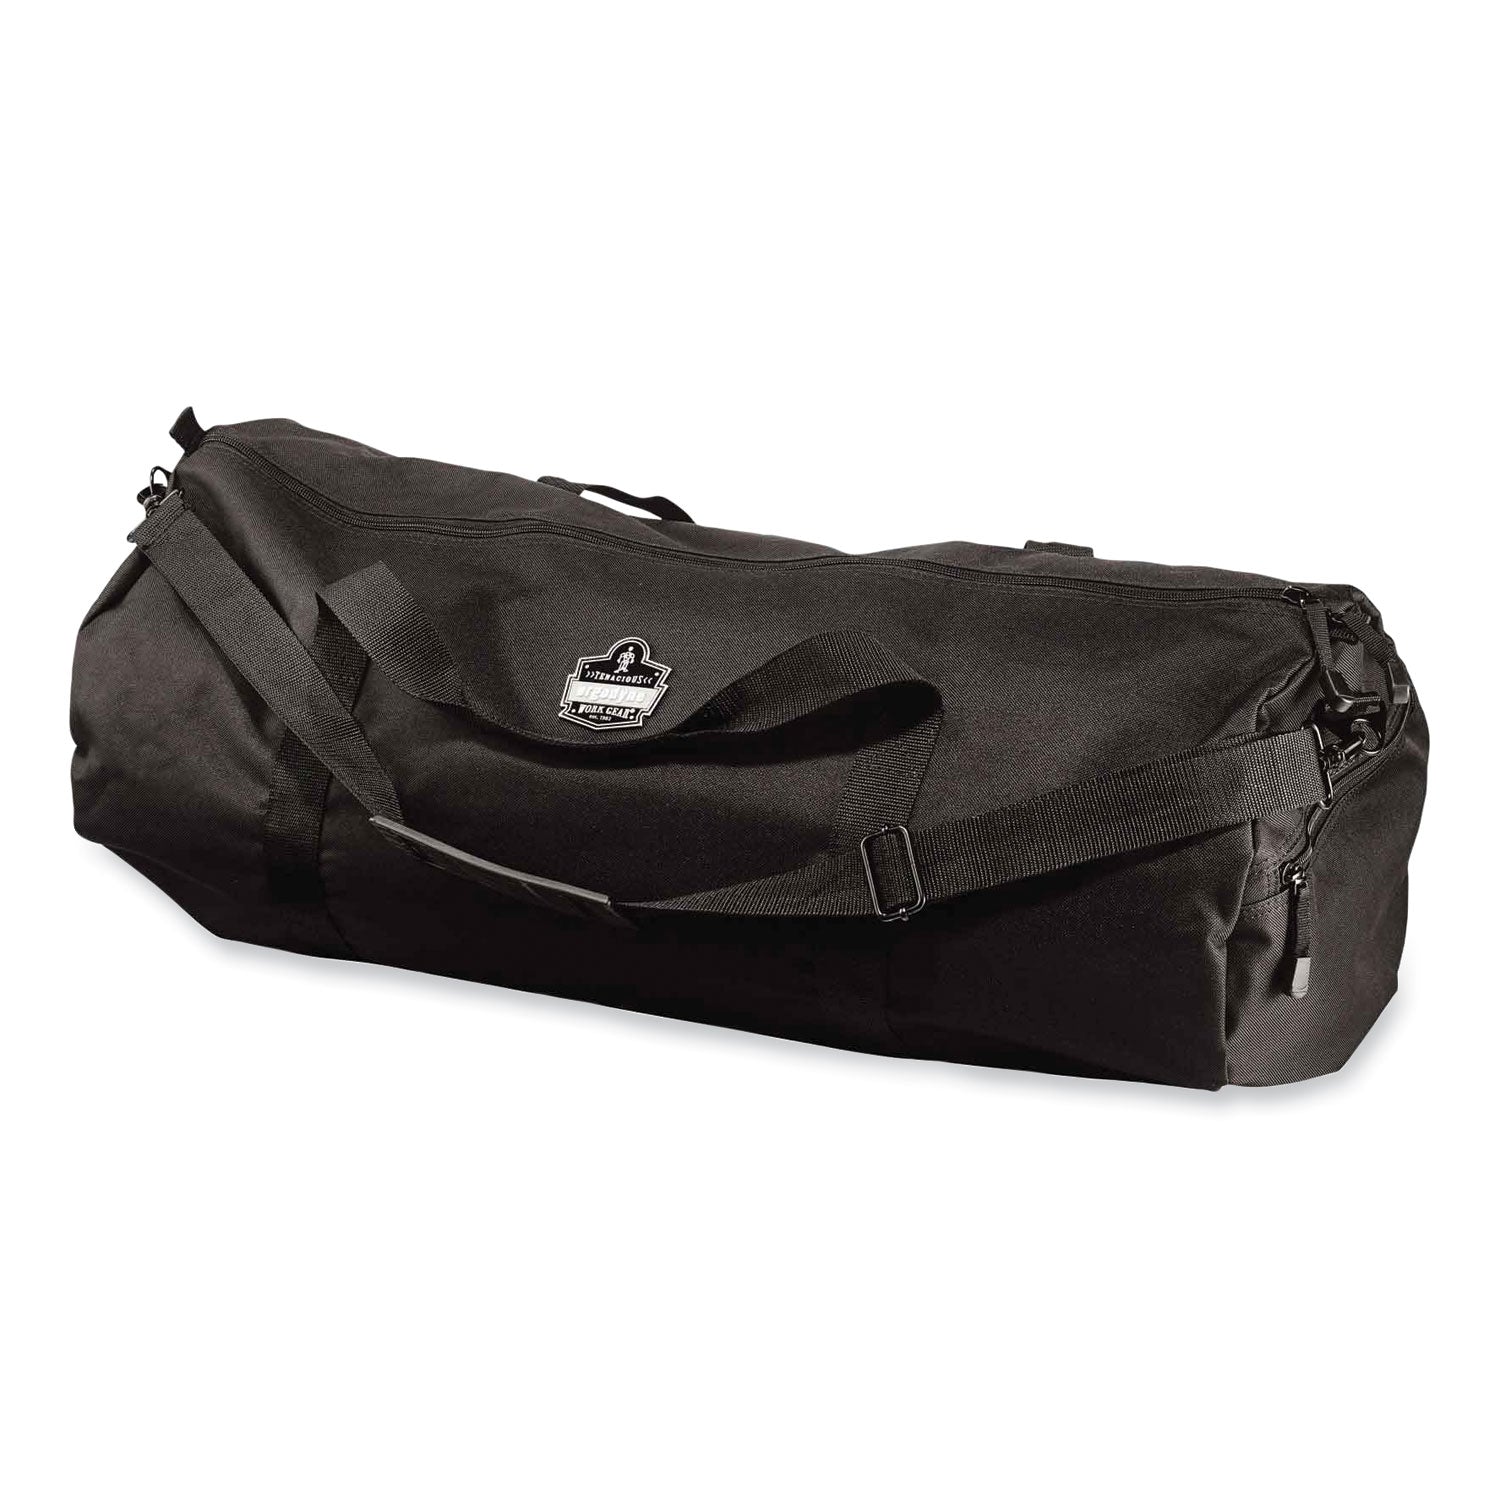 arsenal-5020p-gear-duffel-bag-polyester-large-14-x-35-x-14-black-ships-in-1-3-business-days_ego13322 - 1